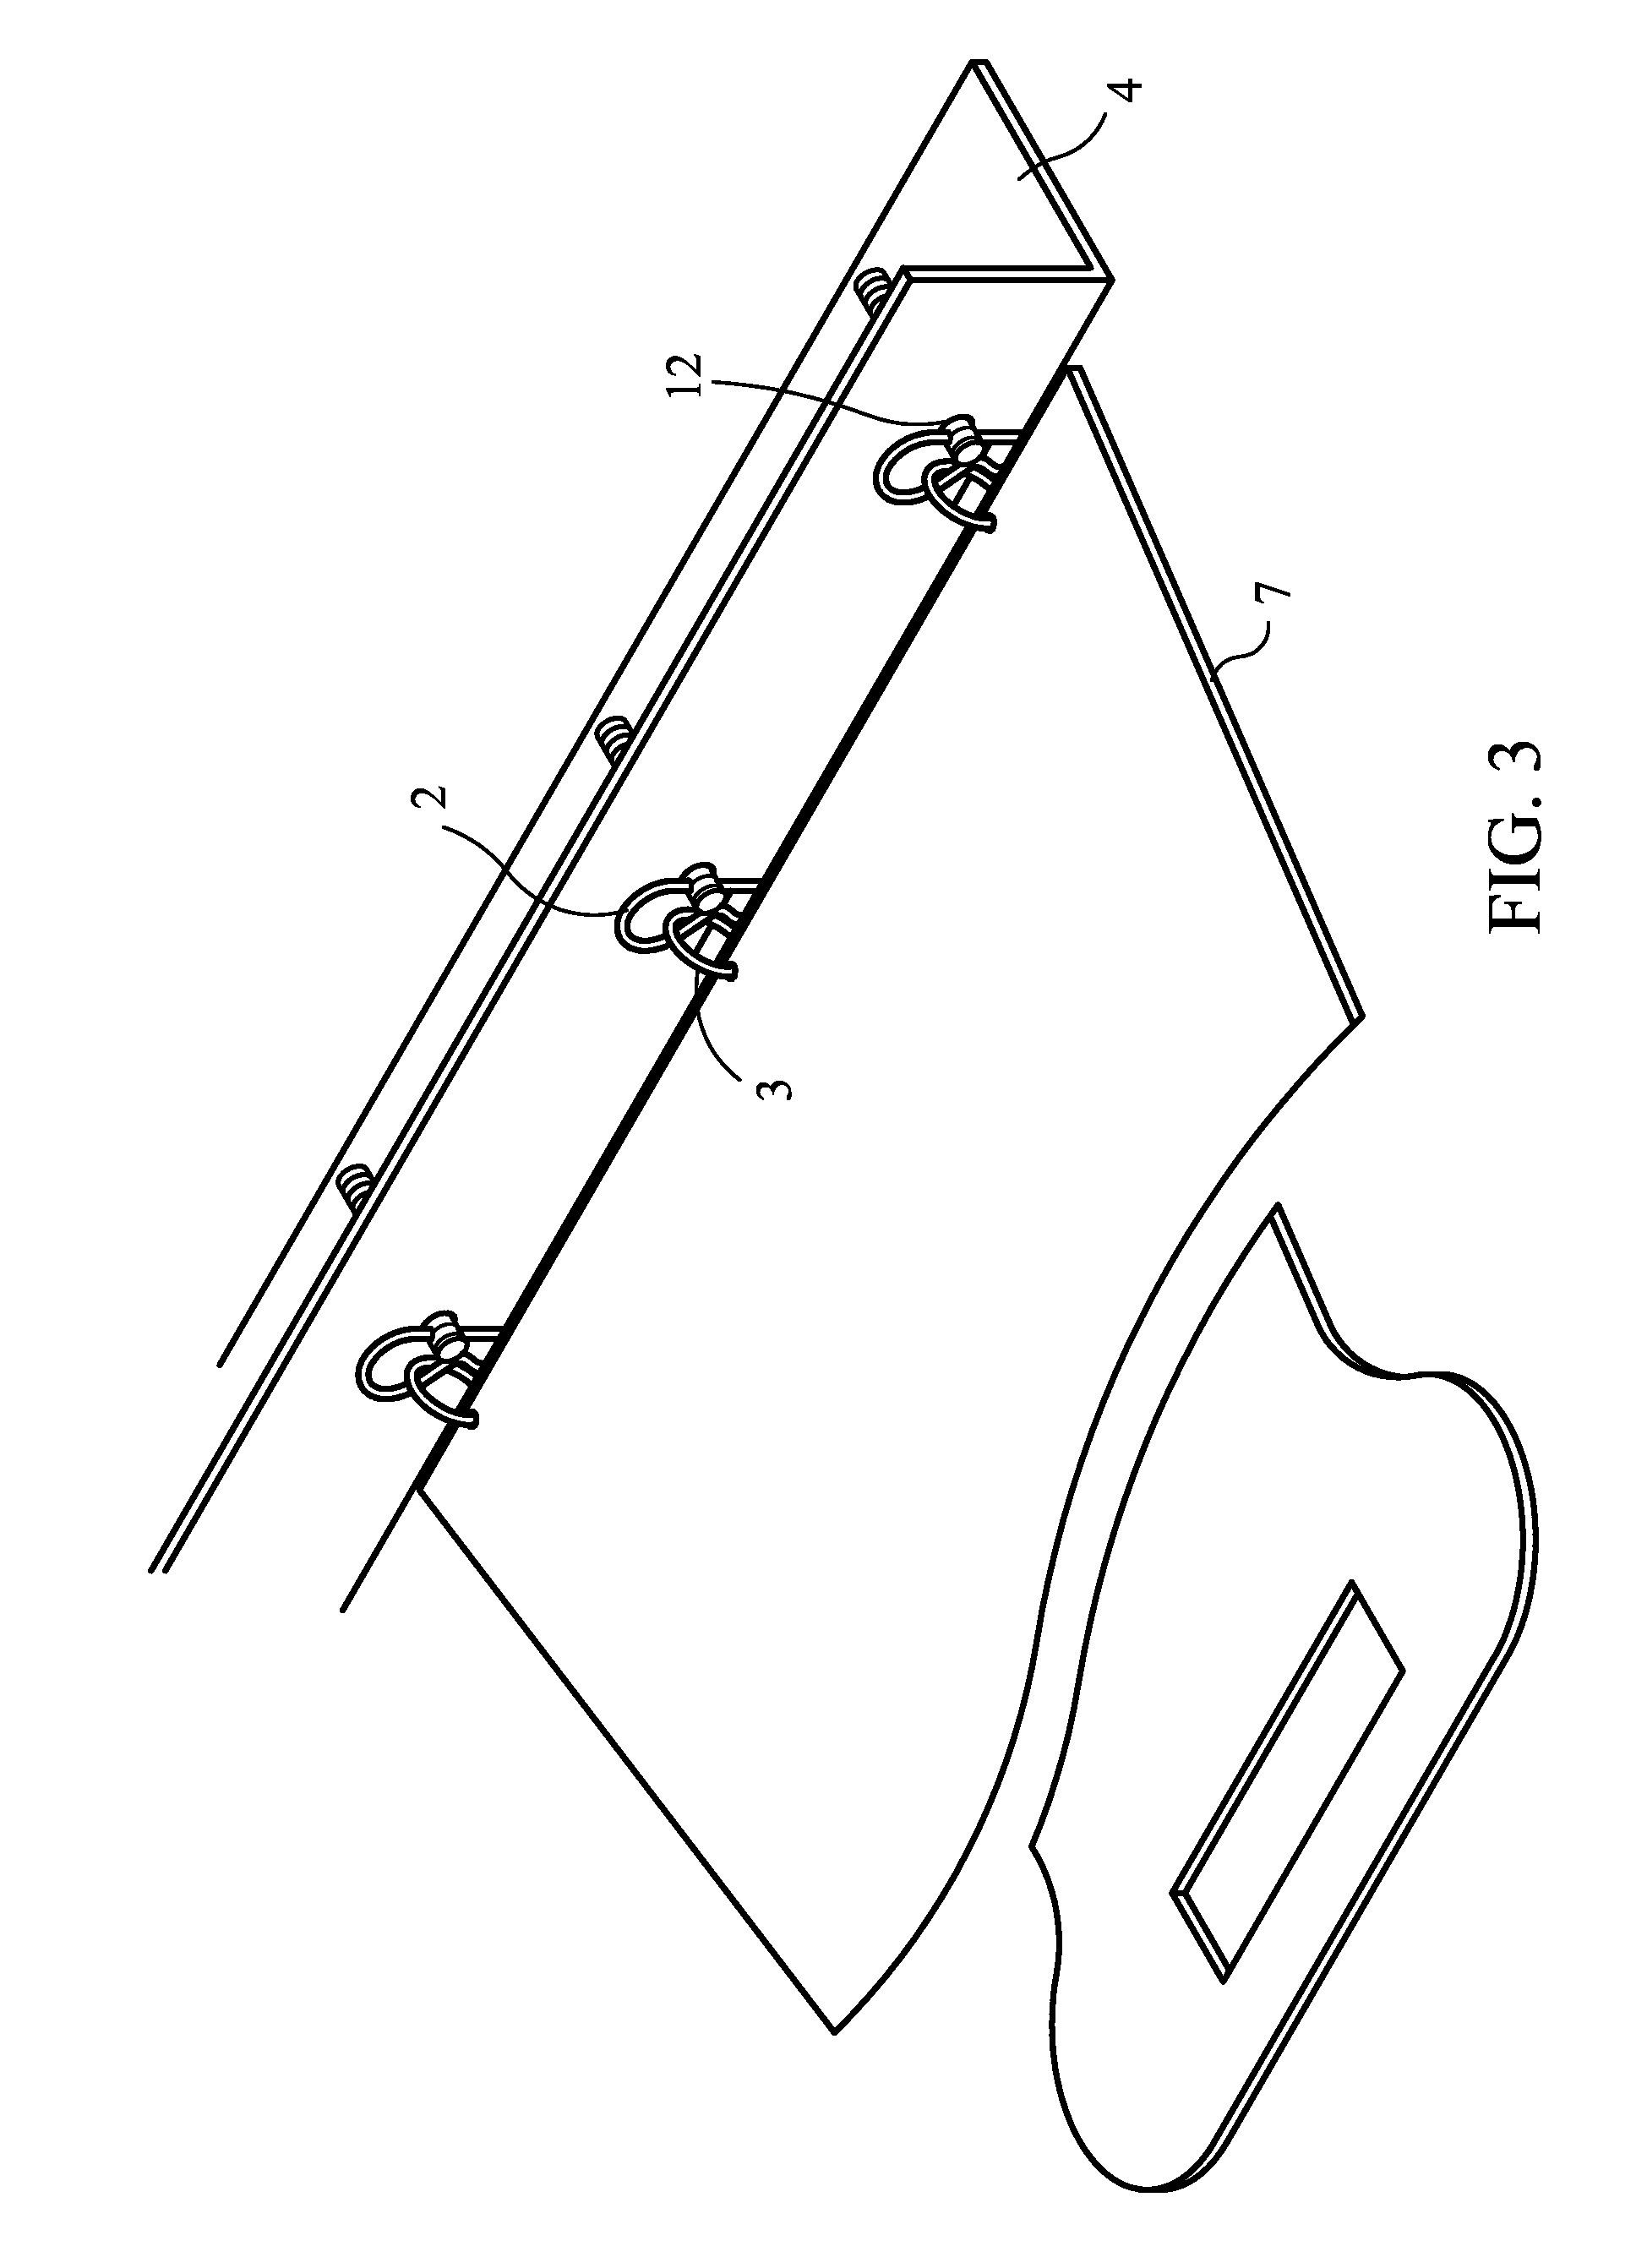 System and method for attaching panels to enable removal from the inside of a structure